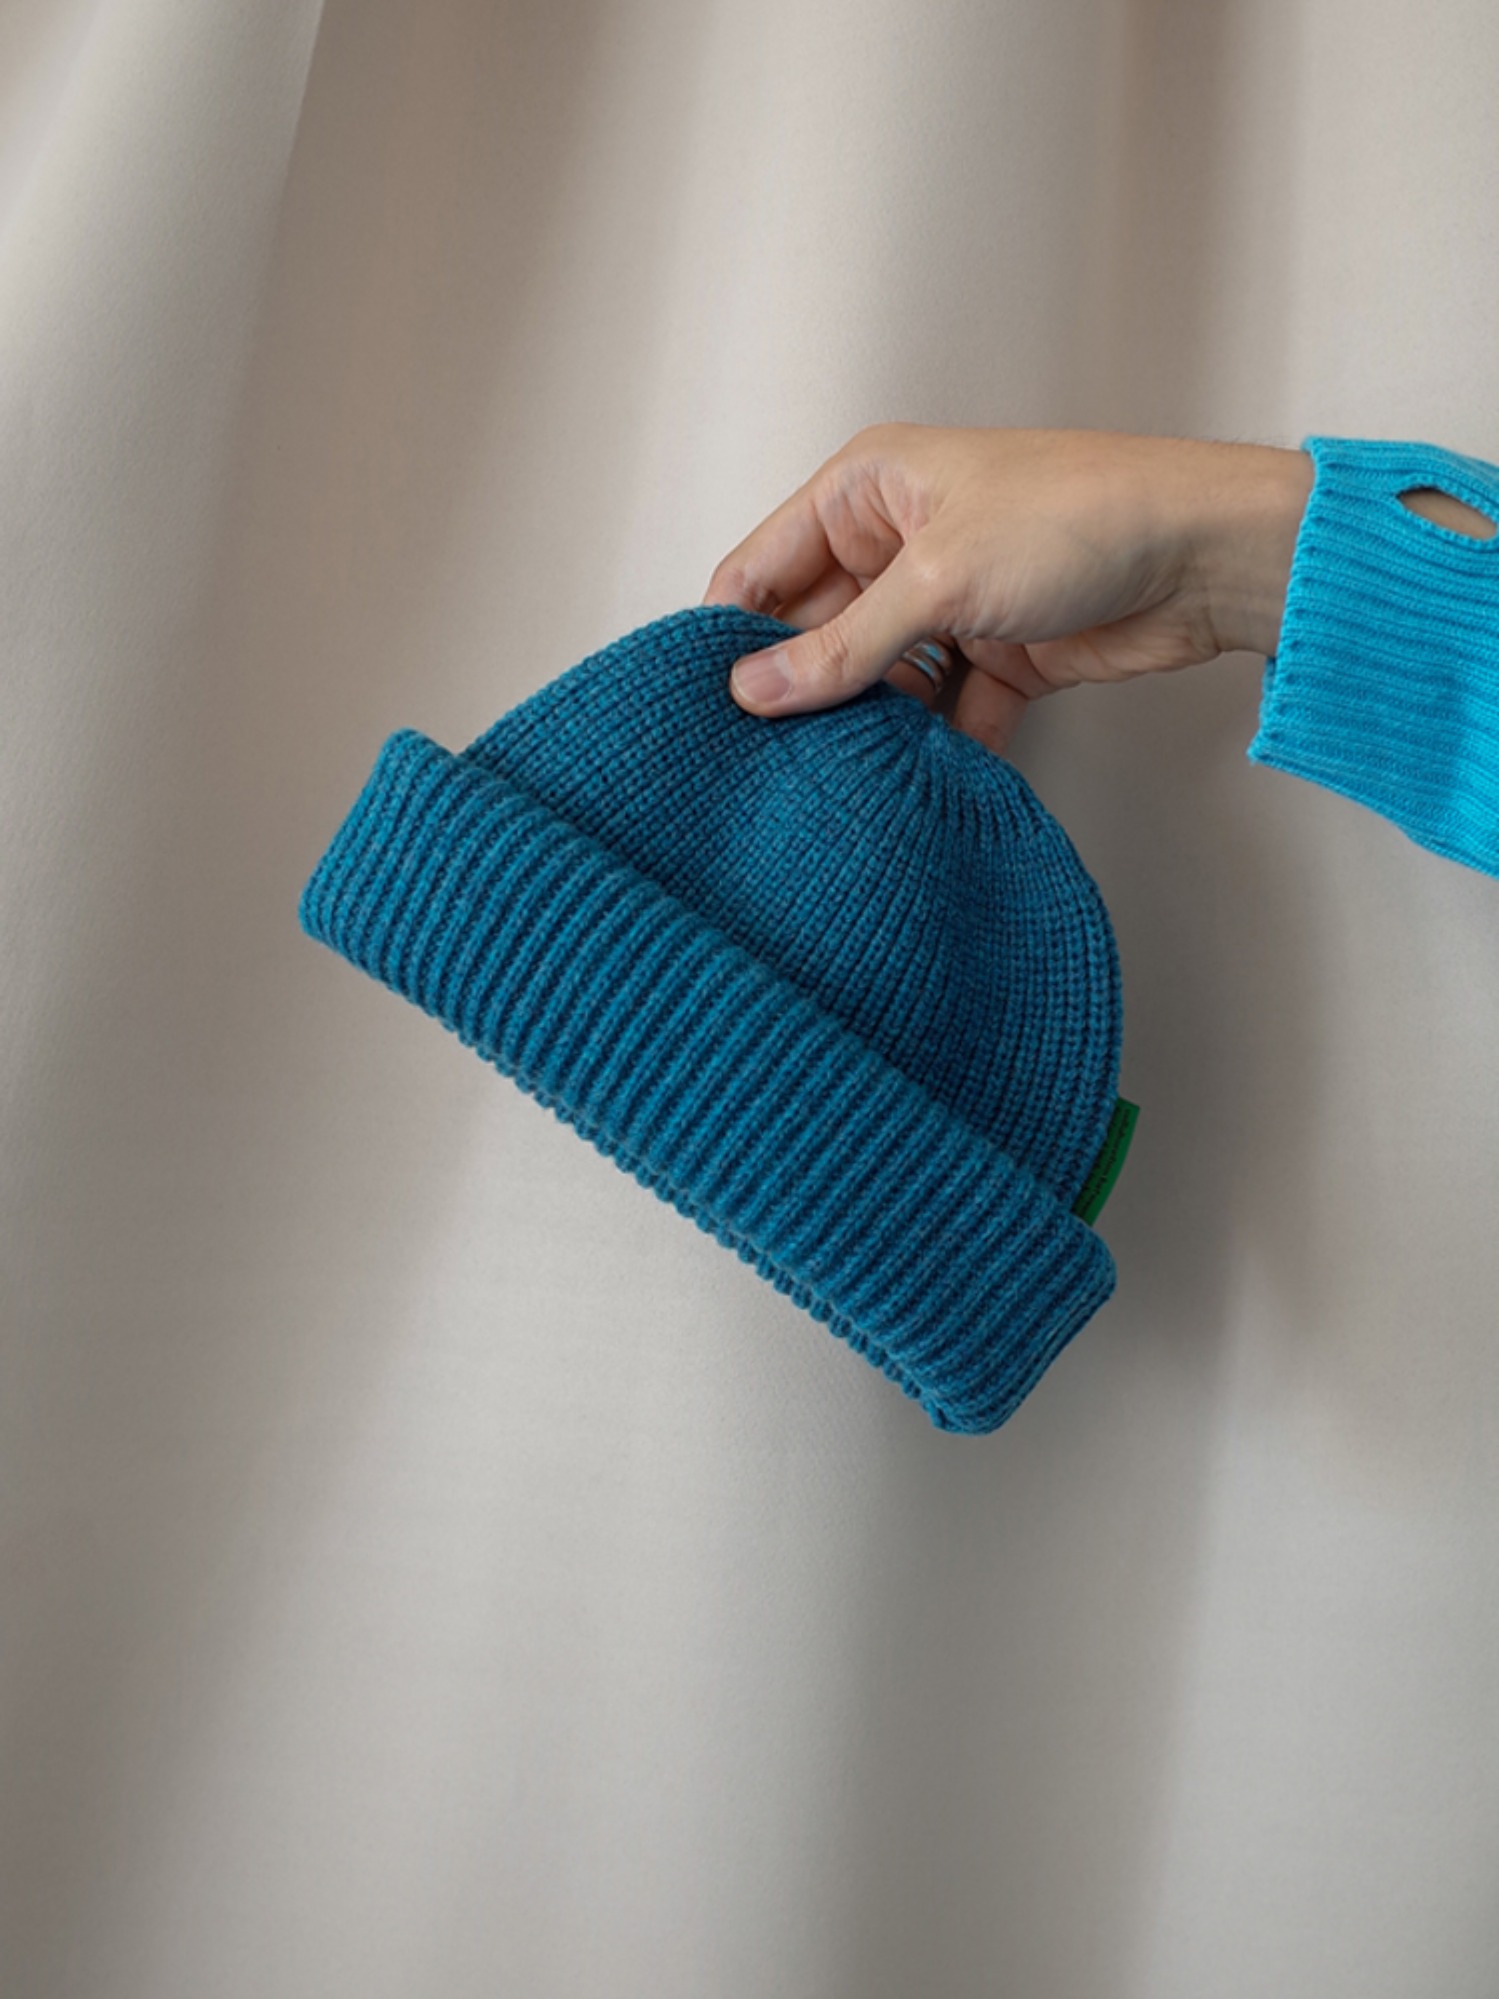 [inch_inch_beanie] Lambs-wool / Turquoise Blue